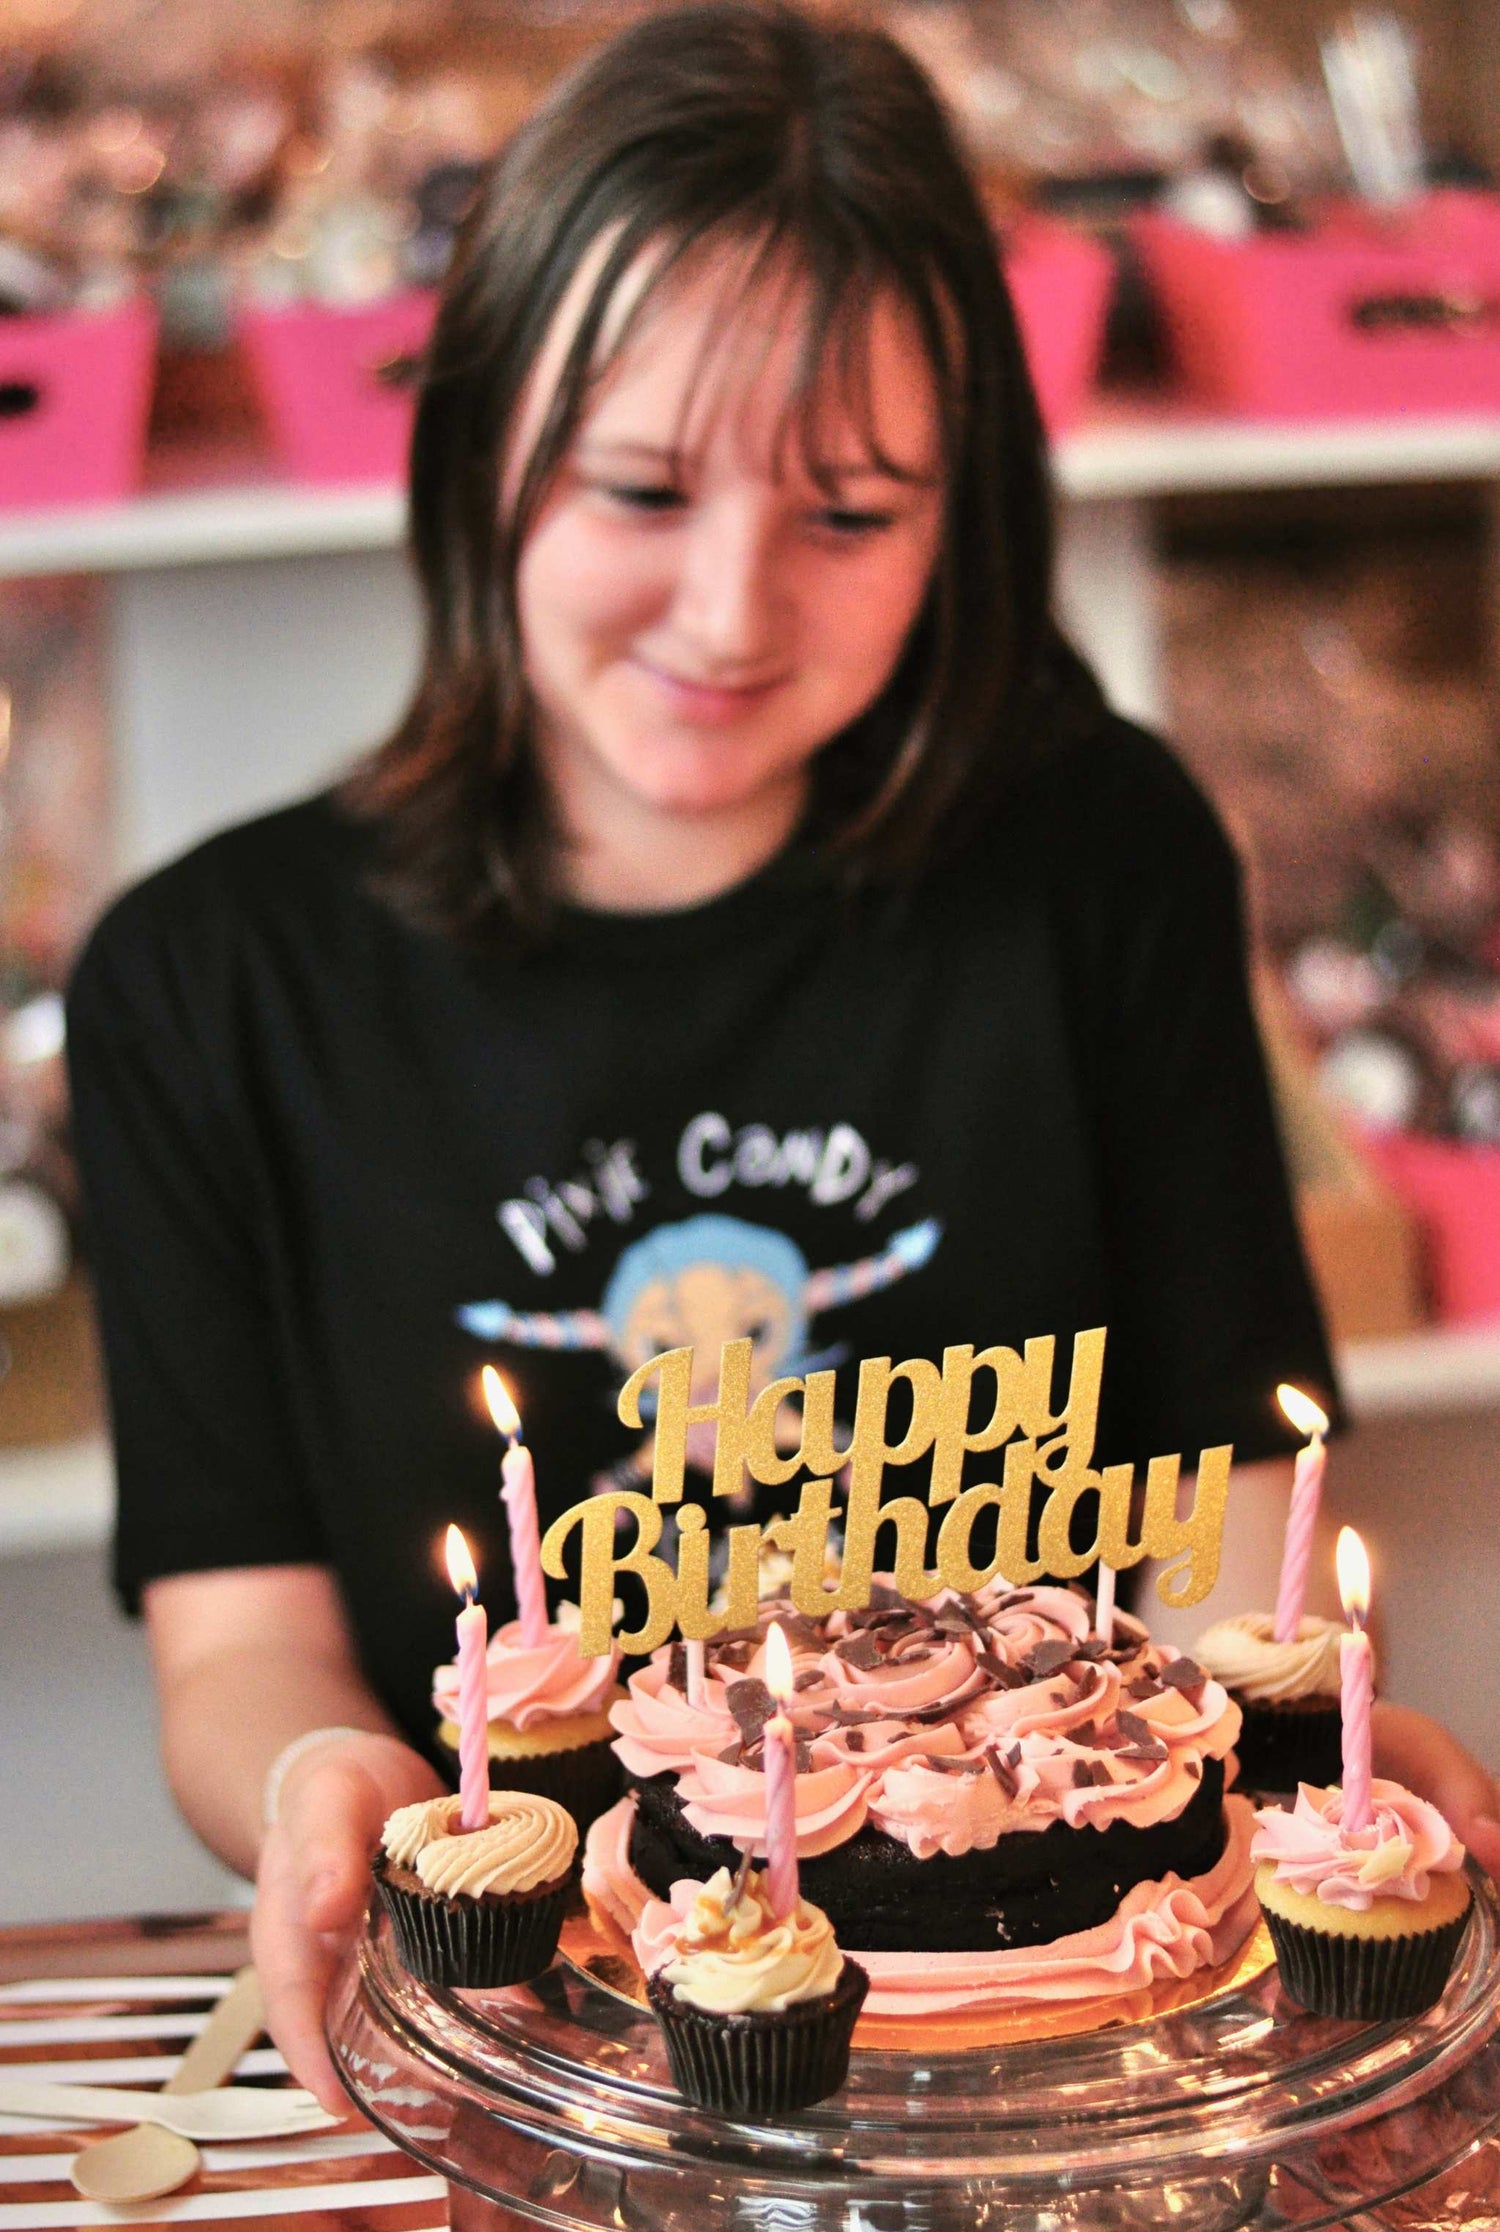 a young caucasian girl with short brown hair looking down at a birthday cake and smiling.